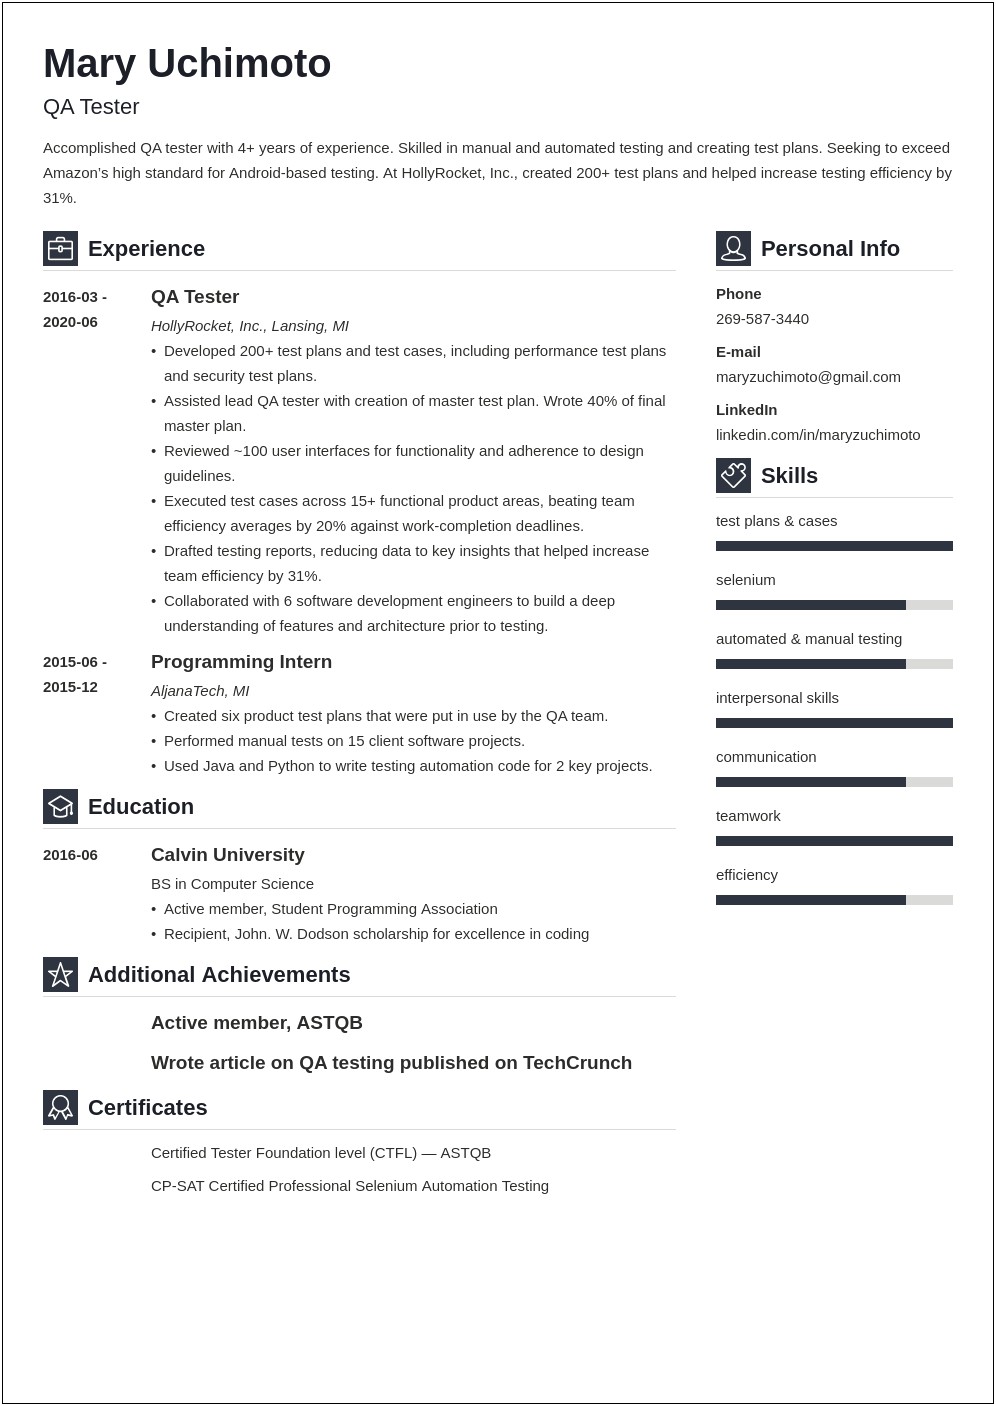 Automation Testing Resume For 7 Years Experience